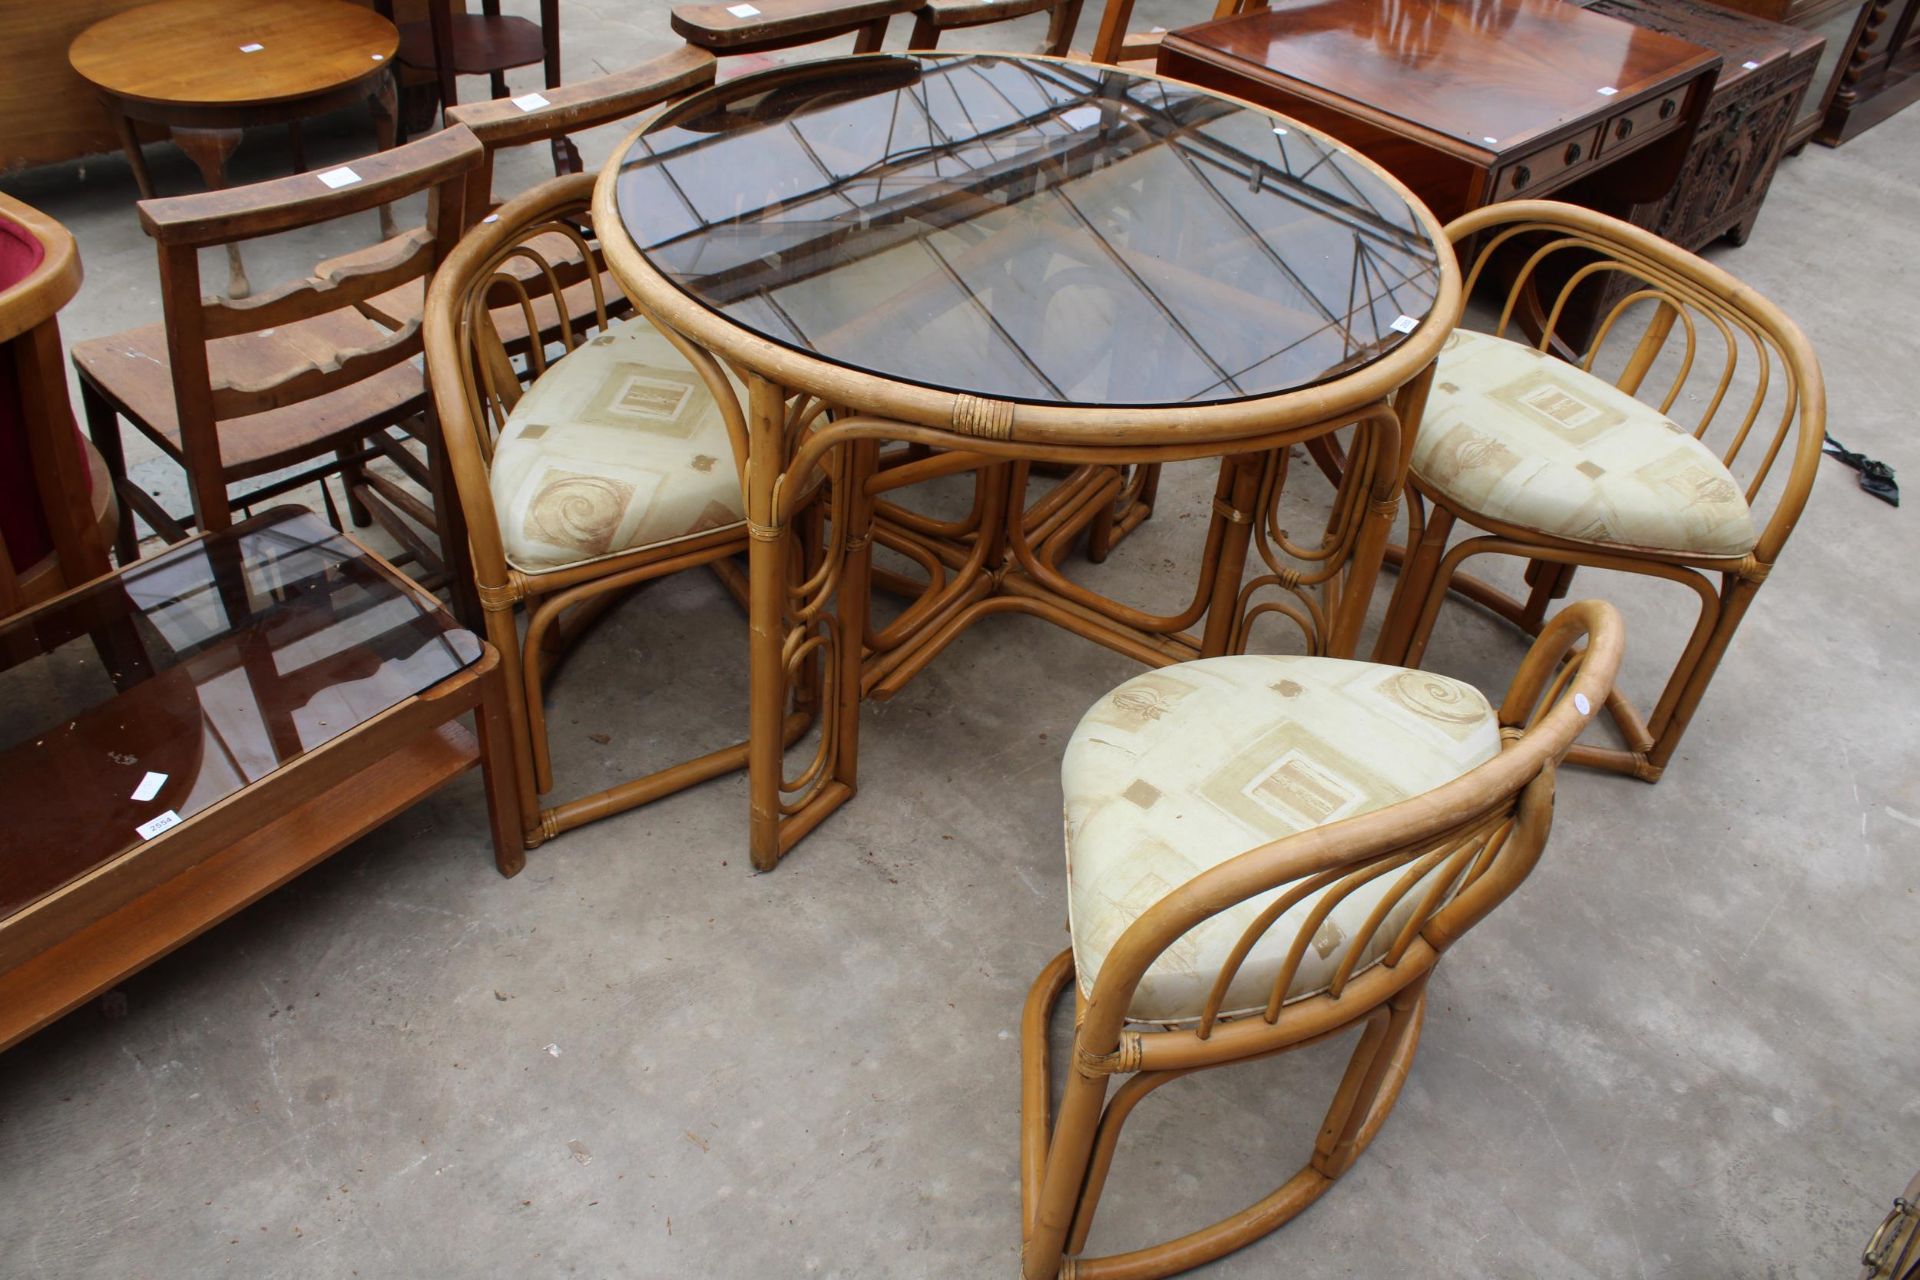 A MODERN 41" DIAMETER BAMBOO AND WICKER DINING TABLE WITH SMOKED GLASS TOP AND FOUR DINING CHAIRS - Image 3 of 6